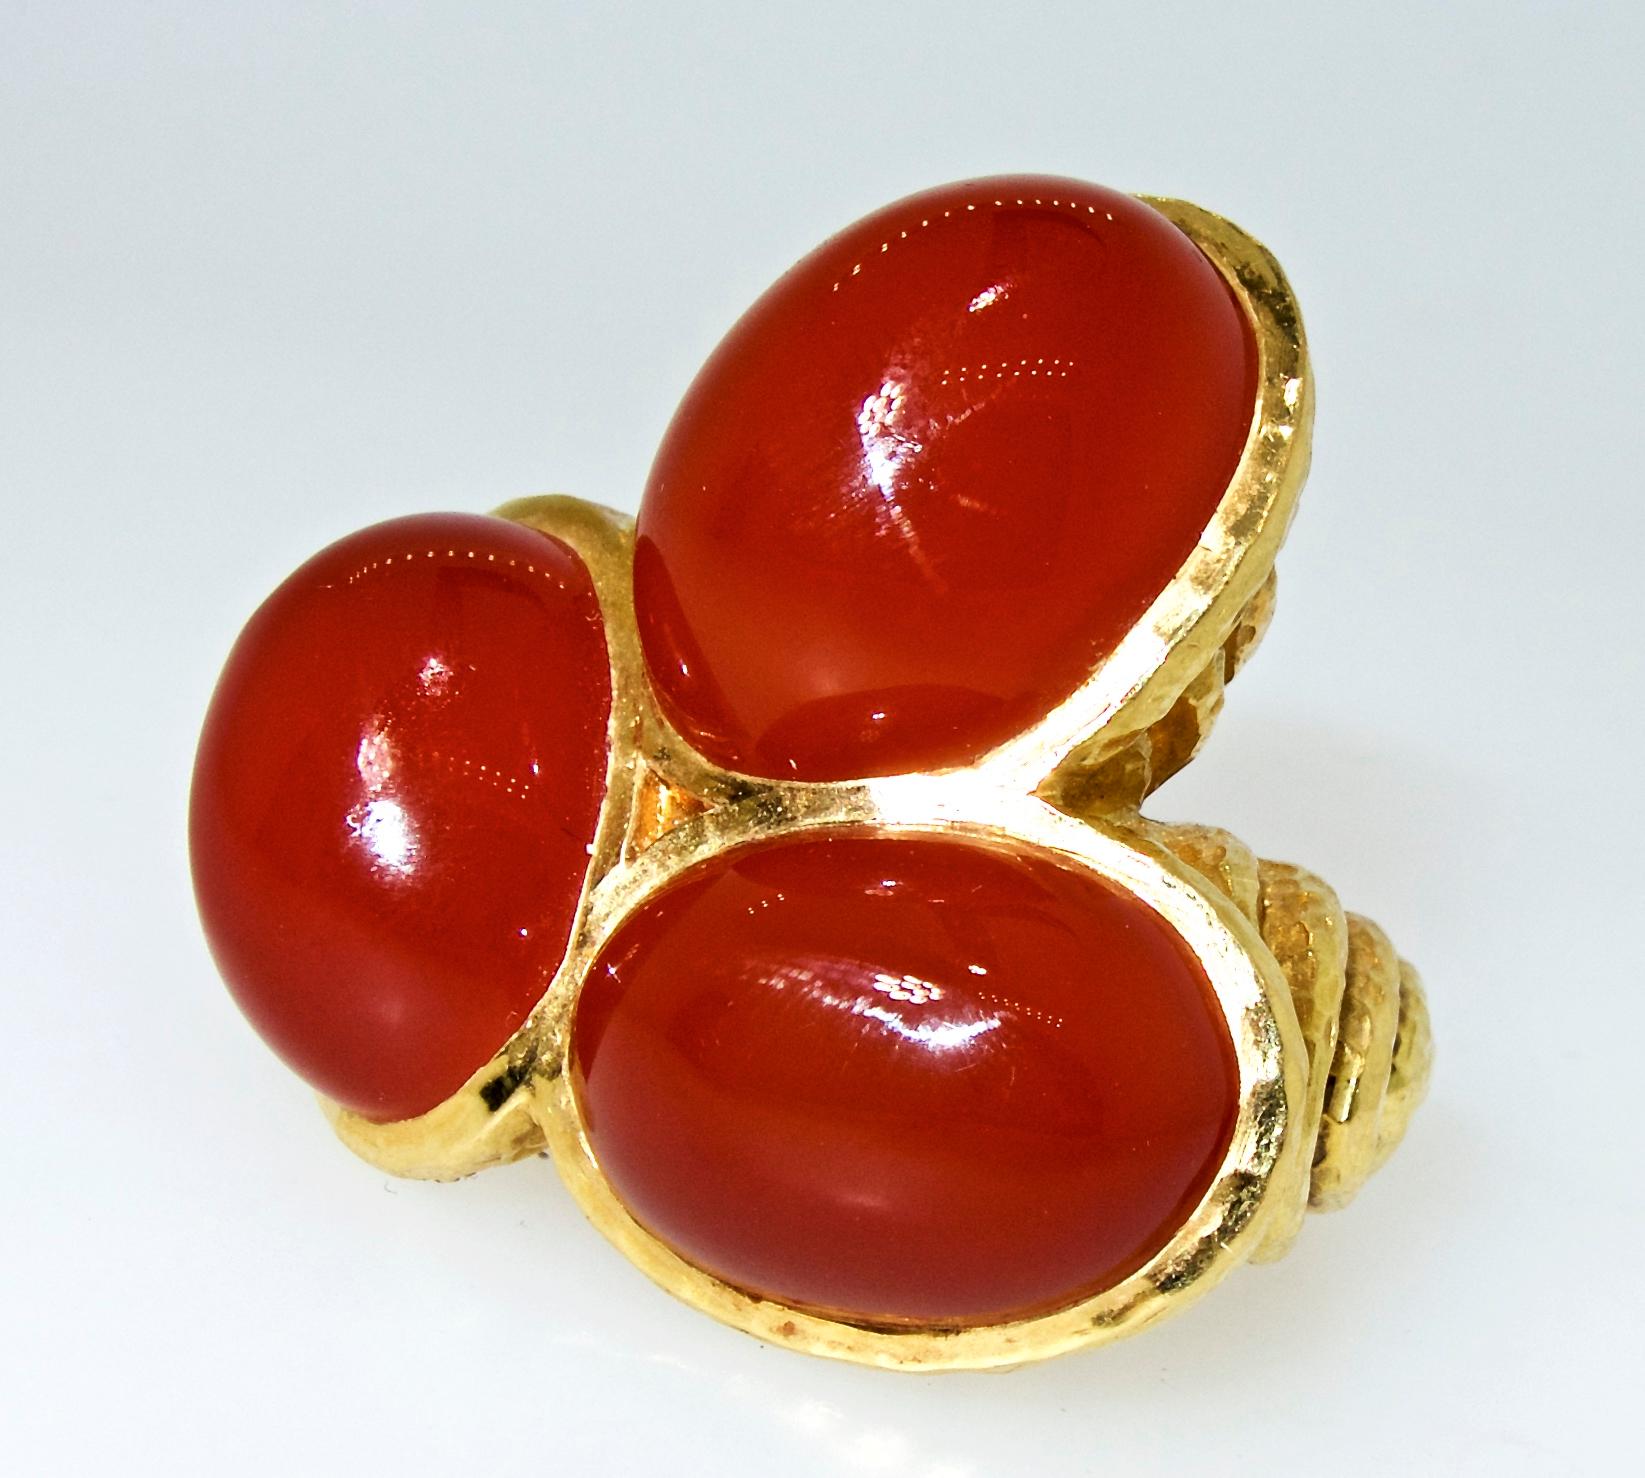 David Webb vintage unusual ring in 18K gold and centering in an 3 carnelian stones the largest measuring 20 by 15 mm.  The deep butterscotch color carnelian stones are set in an asymmetric, unpredictable design that is innovative even for the